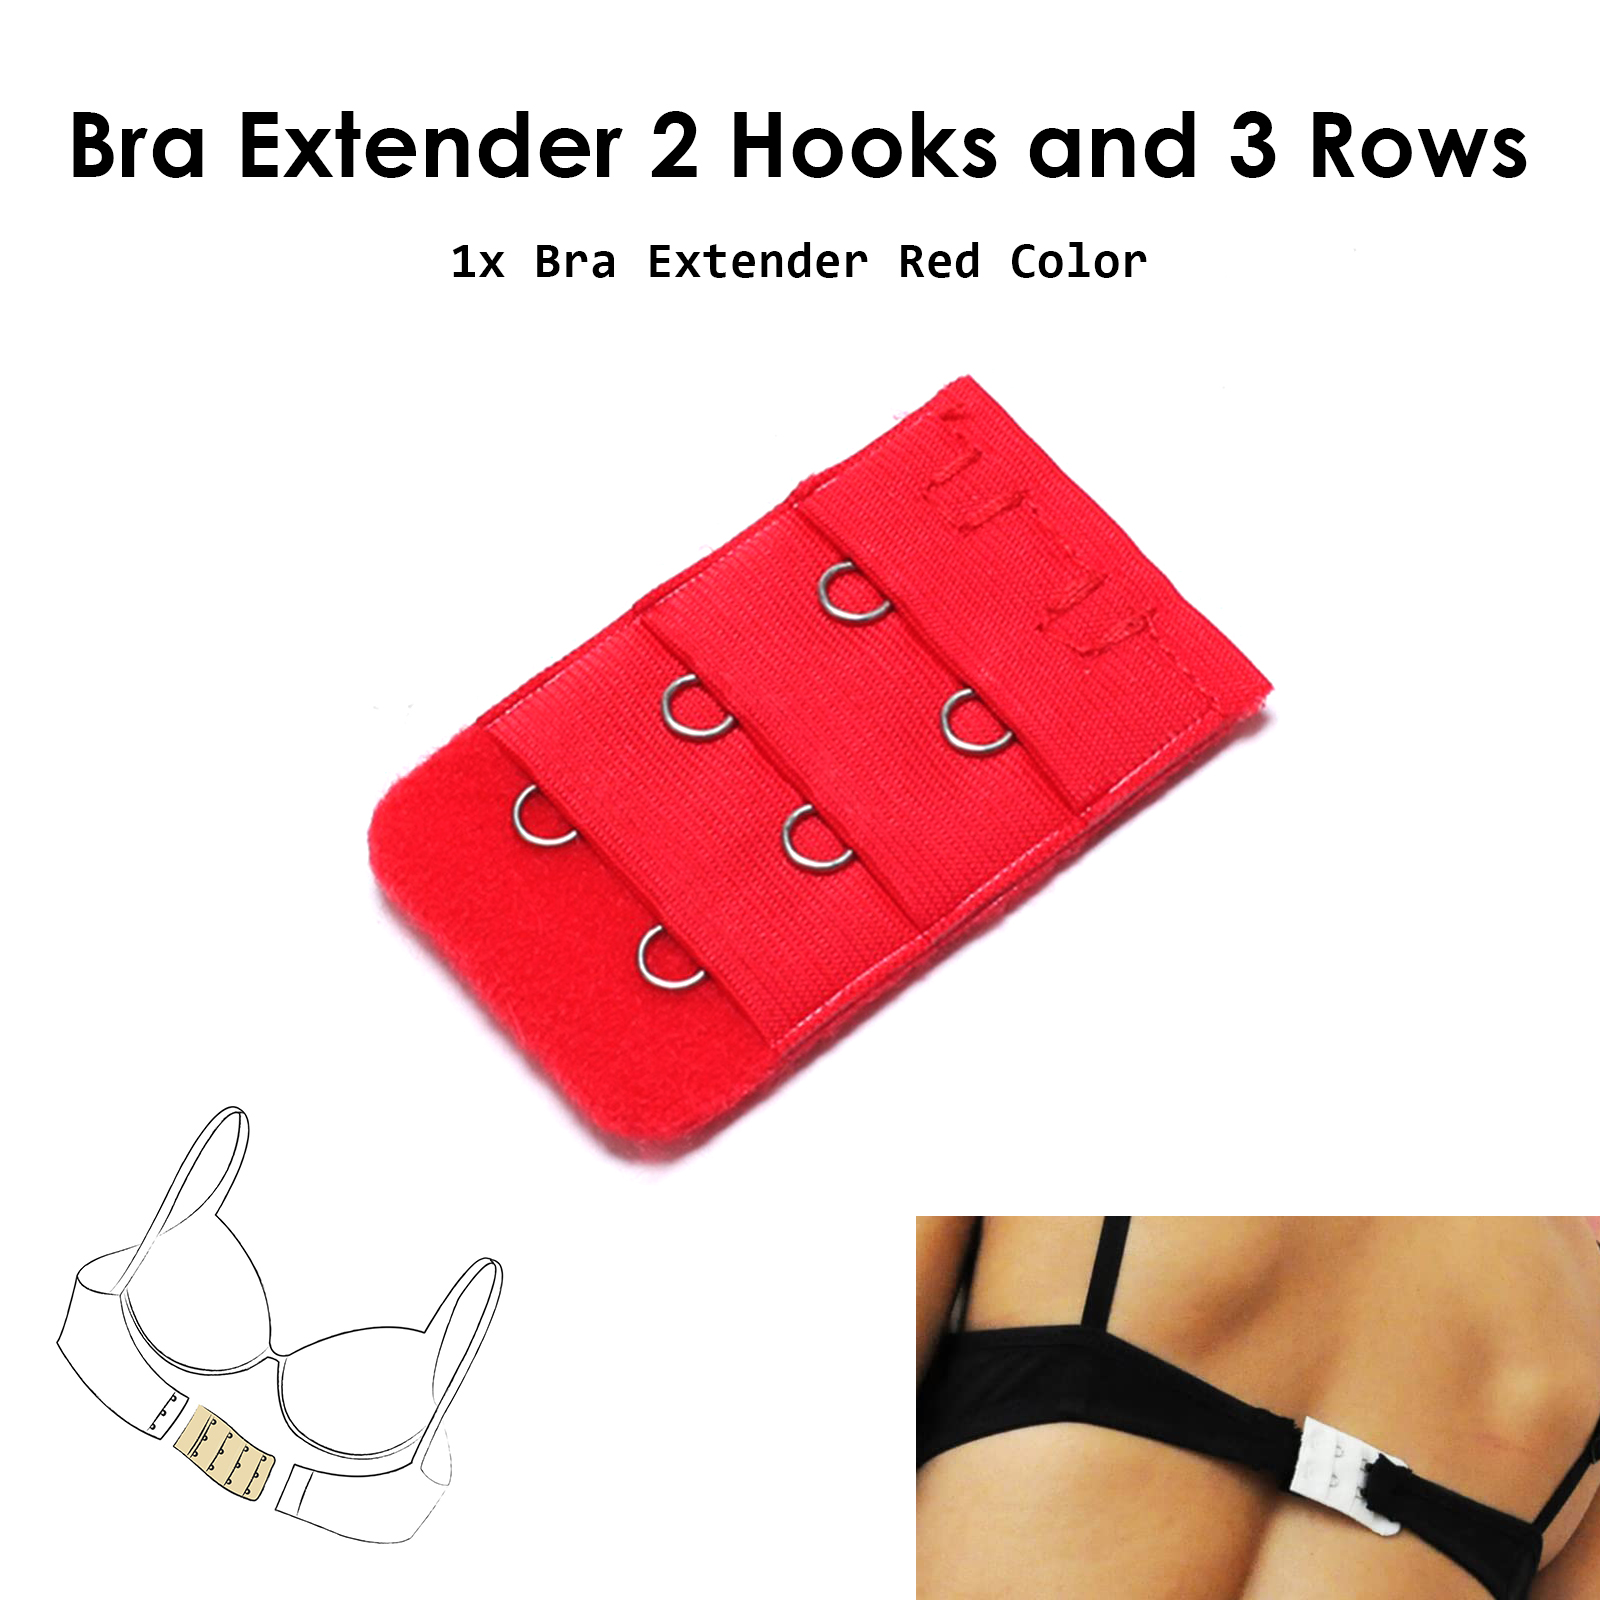 Top Quality Bra Extender Available in 2-Hook and 3-Hooks Soft and  Comfortable Bra Extension Increase 0.5 to 2 inches to Band Size of your Bra  Hook Extender in Black Skin Pink and